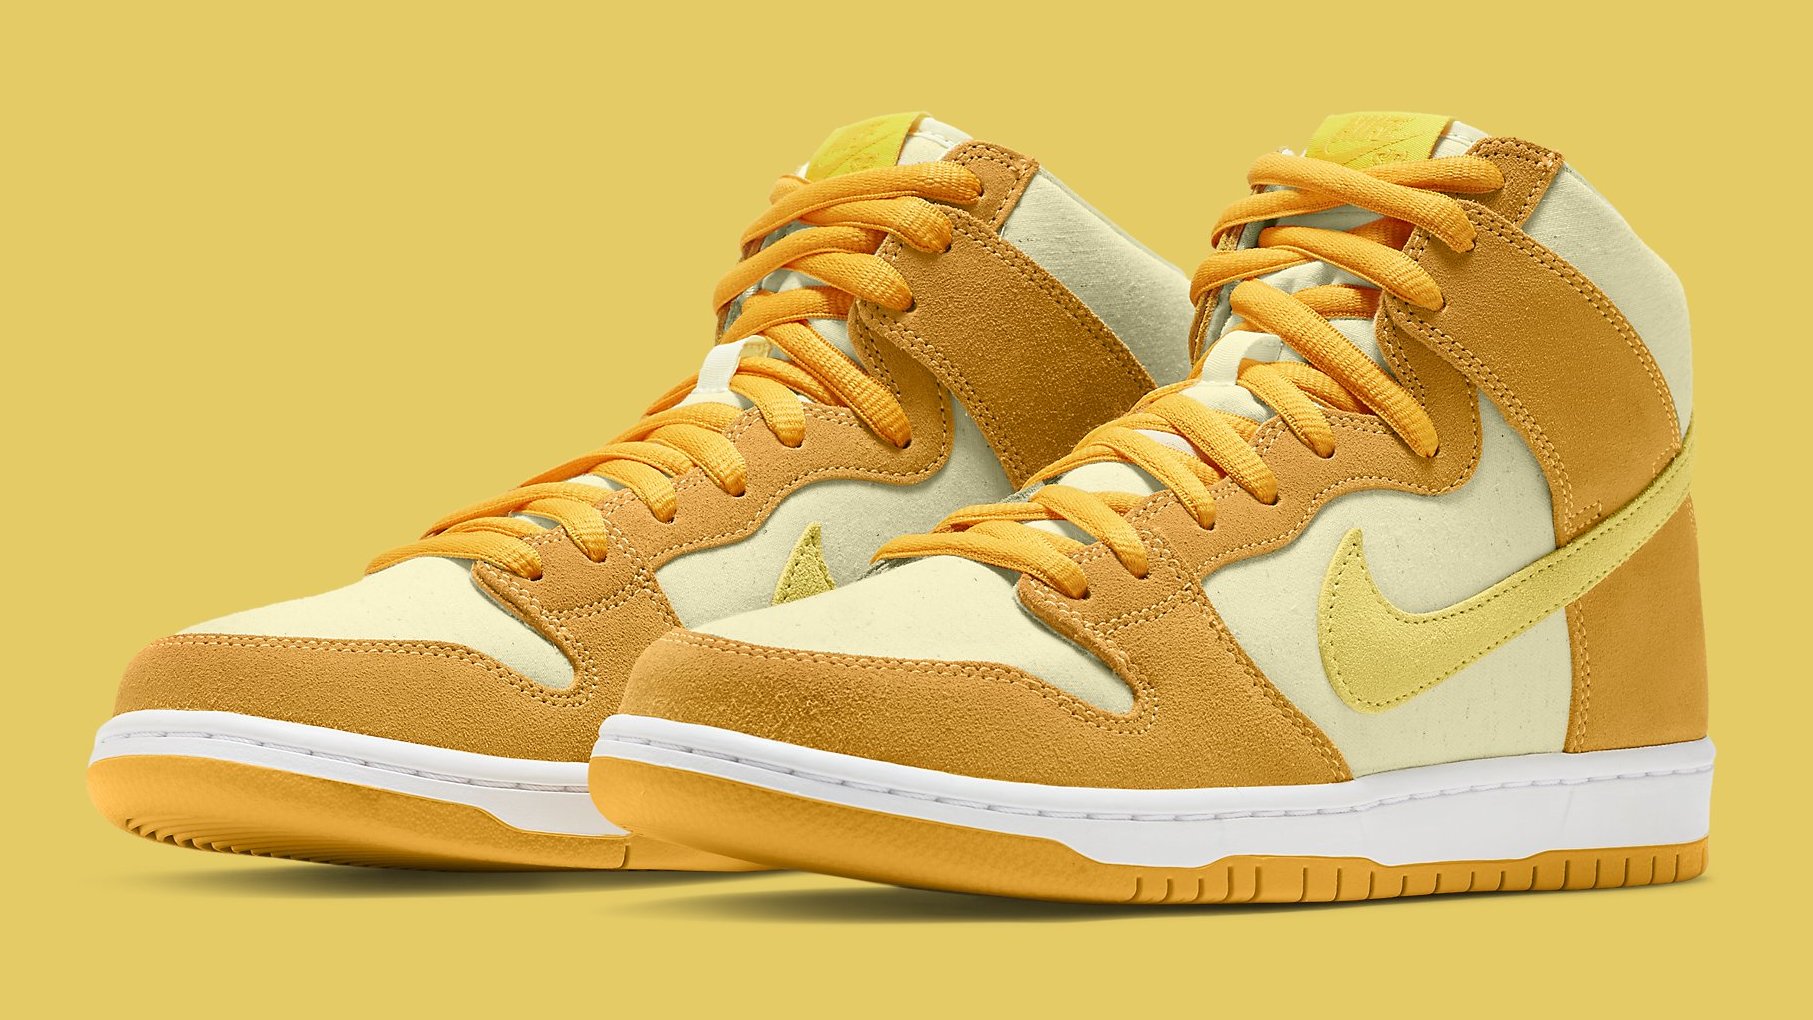 Another Fruit-Inspired Nike SB Dunk Is on the Way | Complex